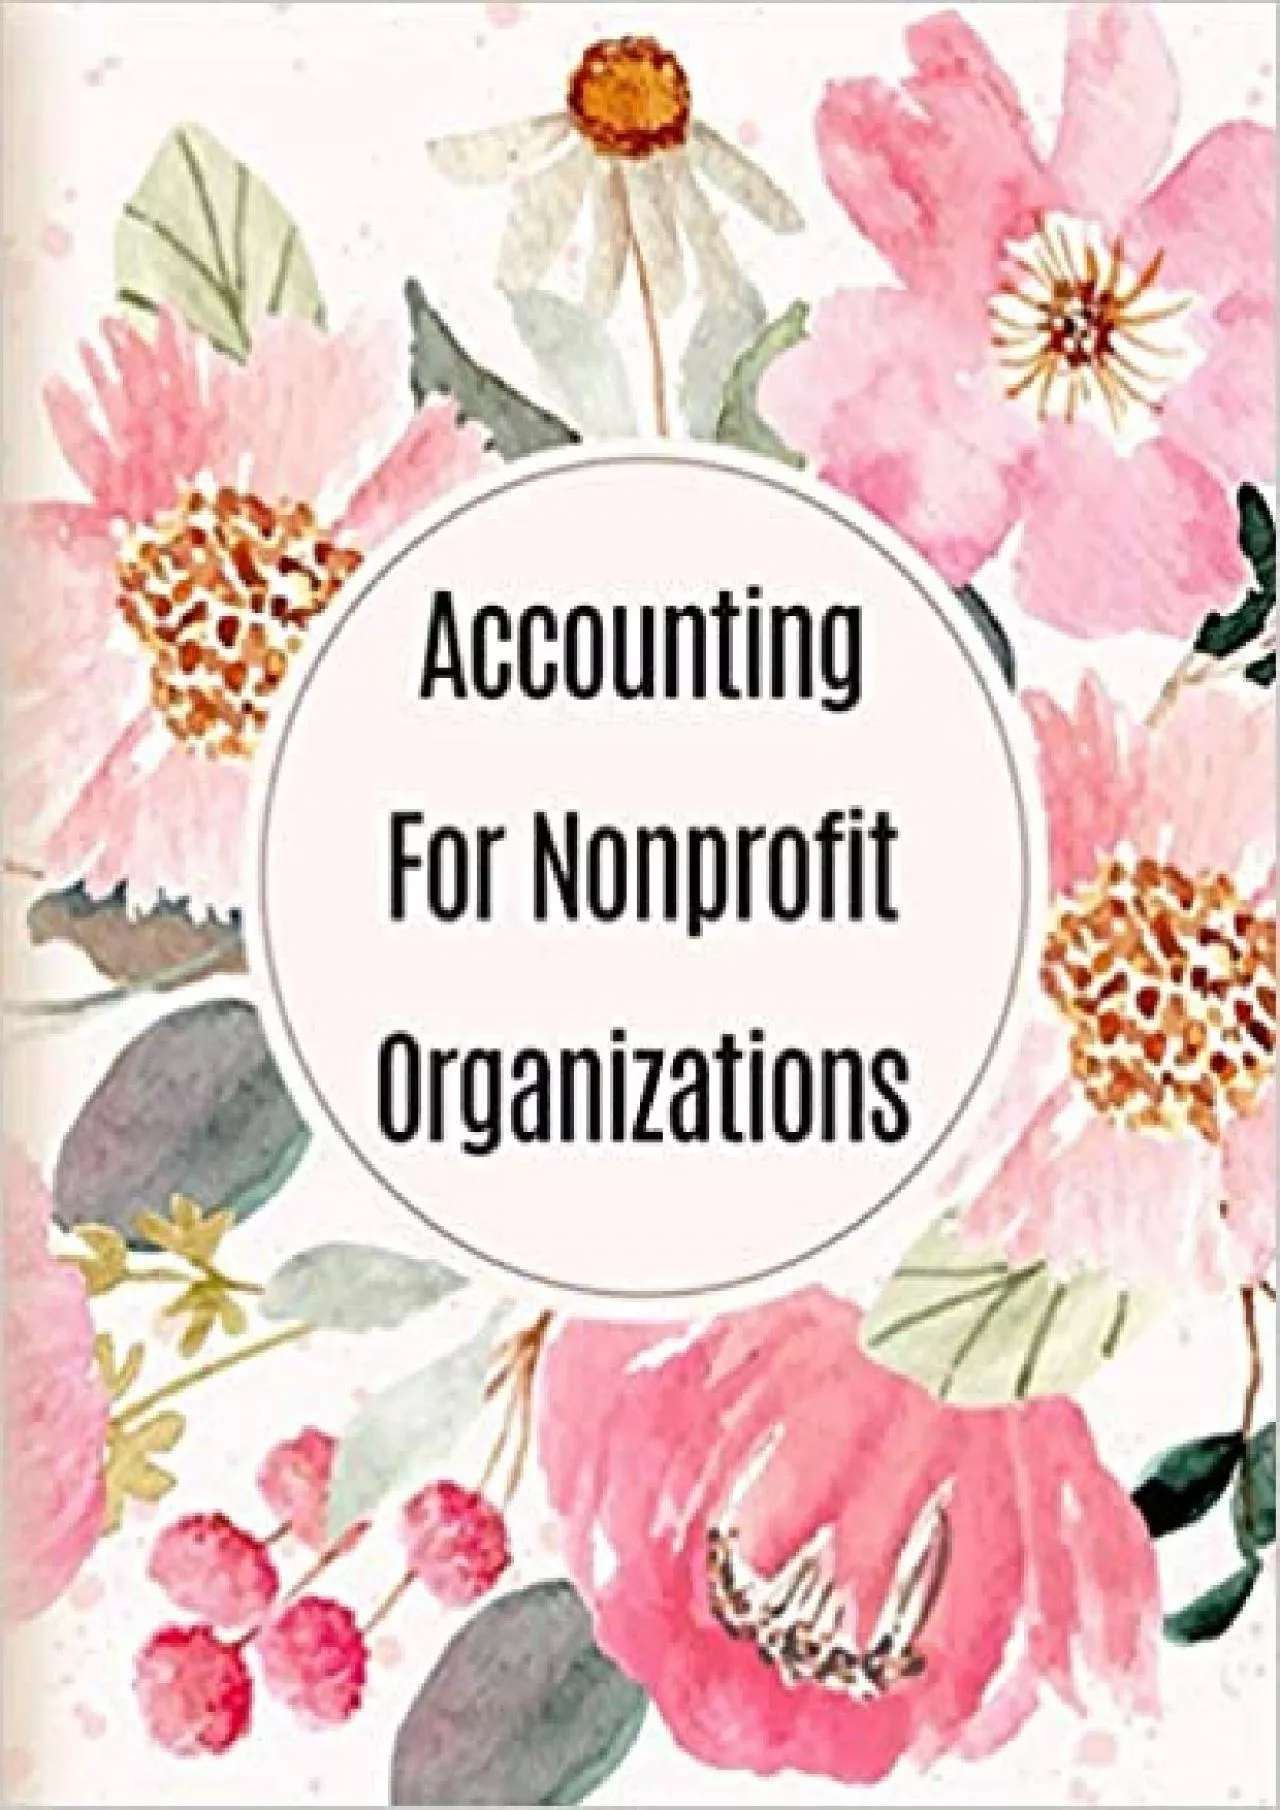 Accounting For Nonprofit Organizations: Ledger Books for Bookkeeping | Simple & Large